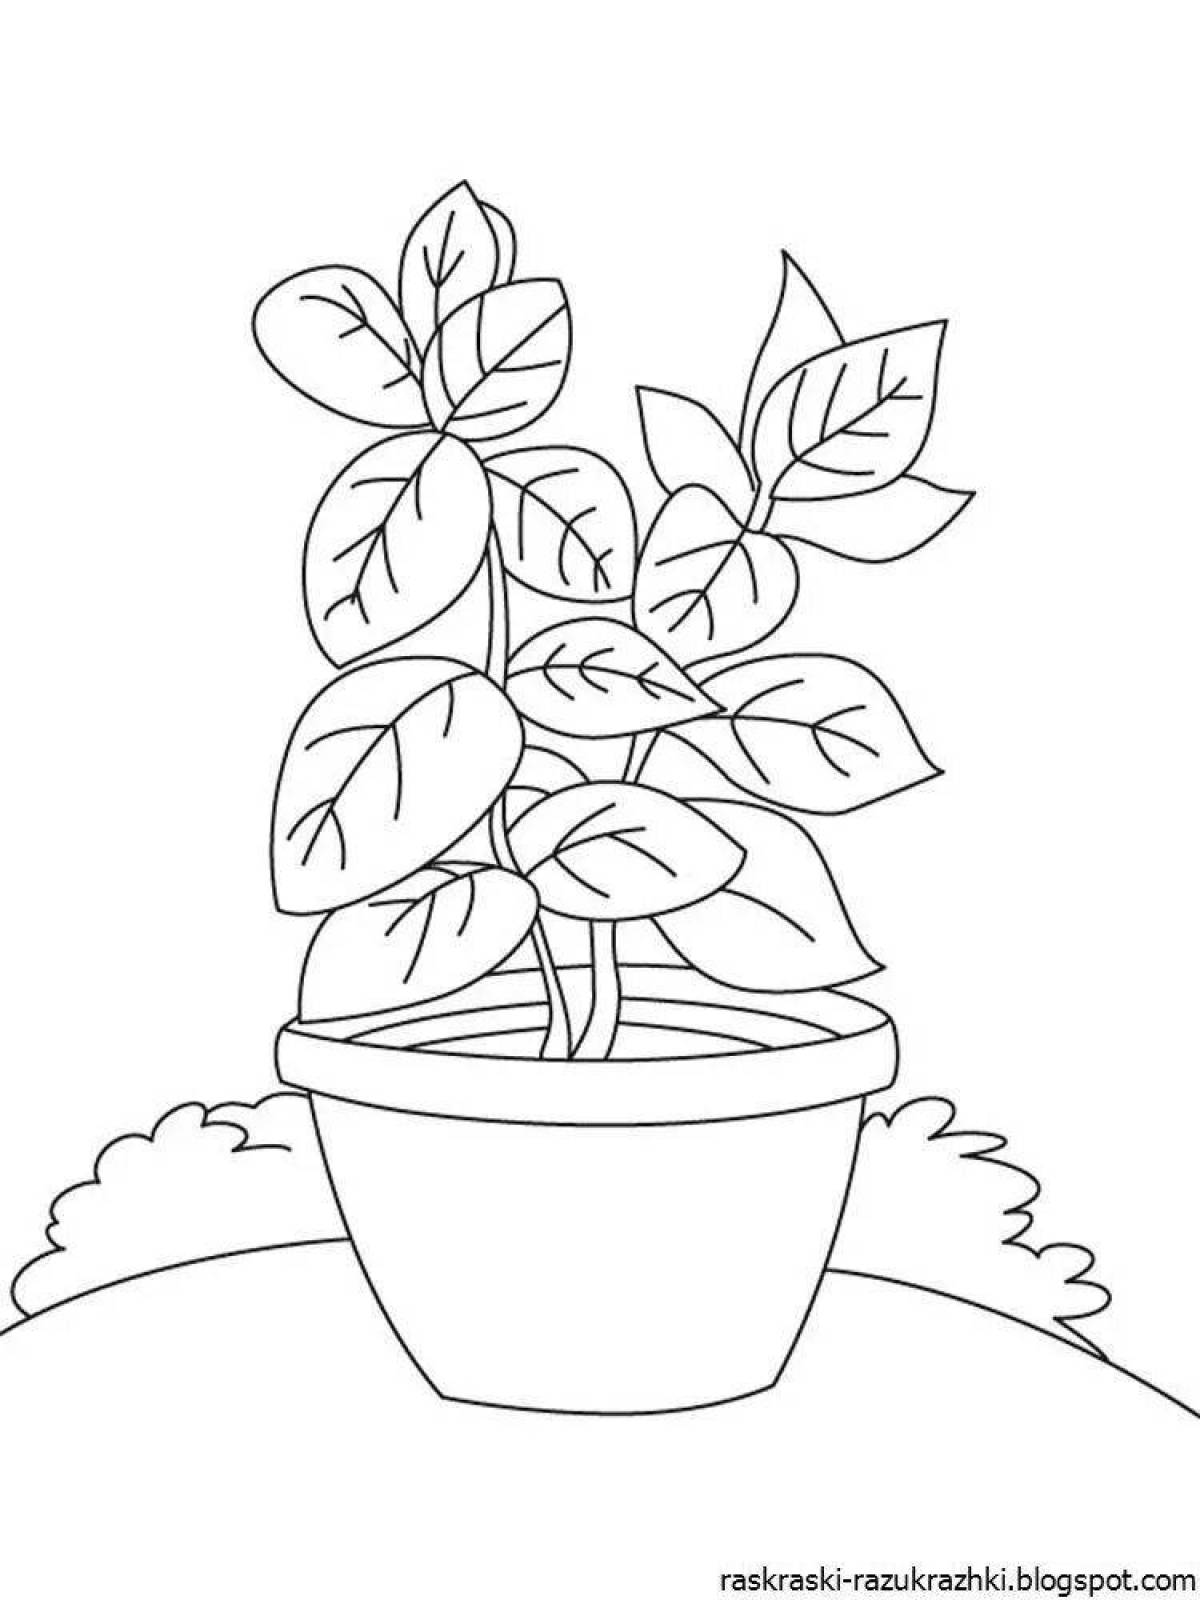 Glowing indoor plants coloring book for children 4-5 years old